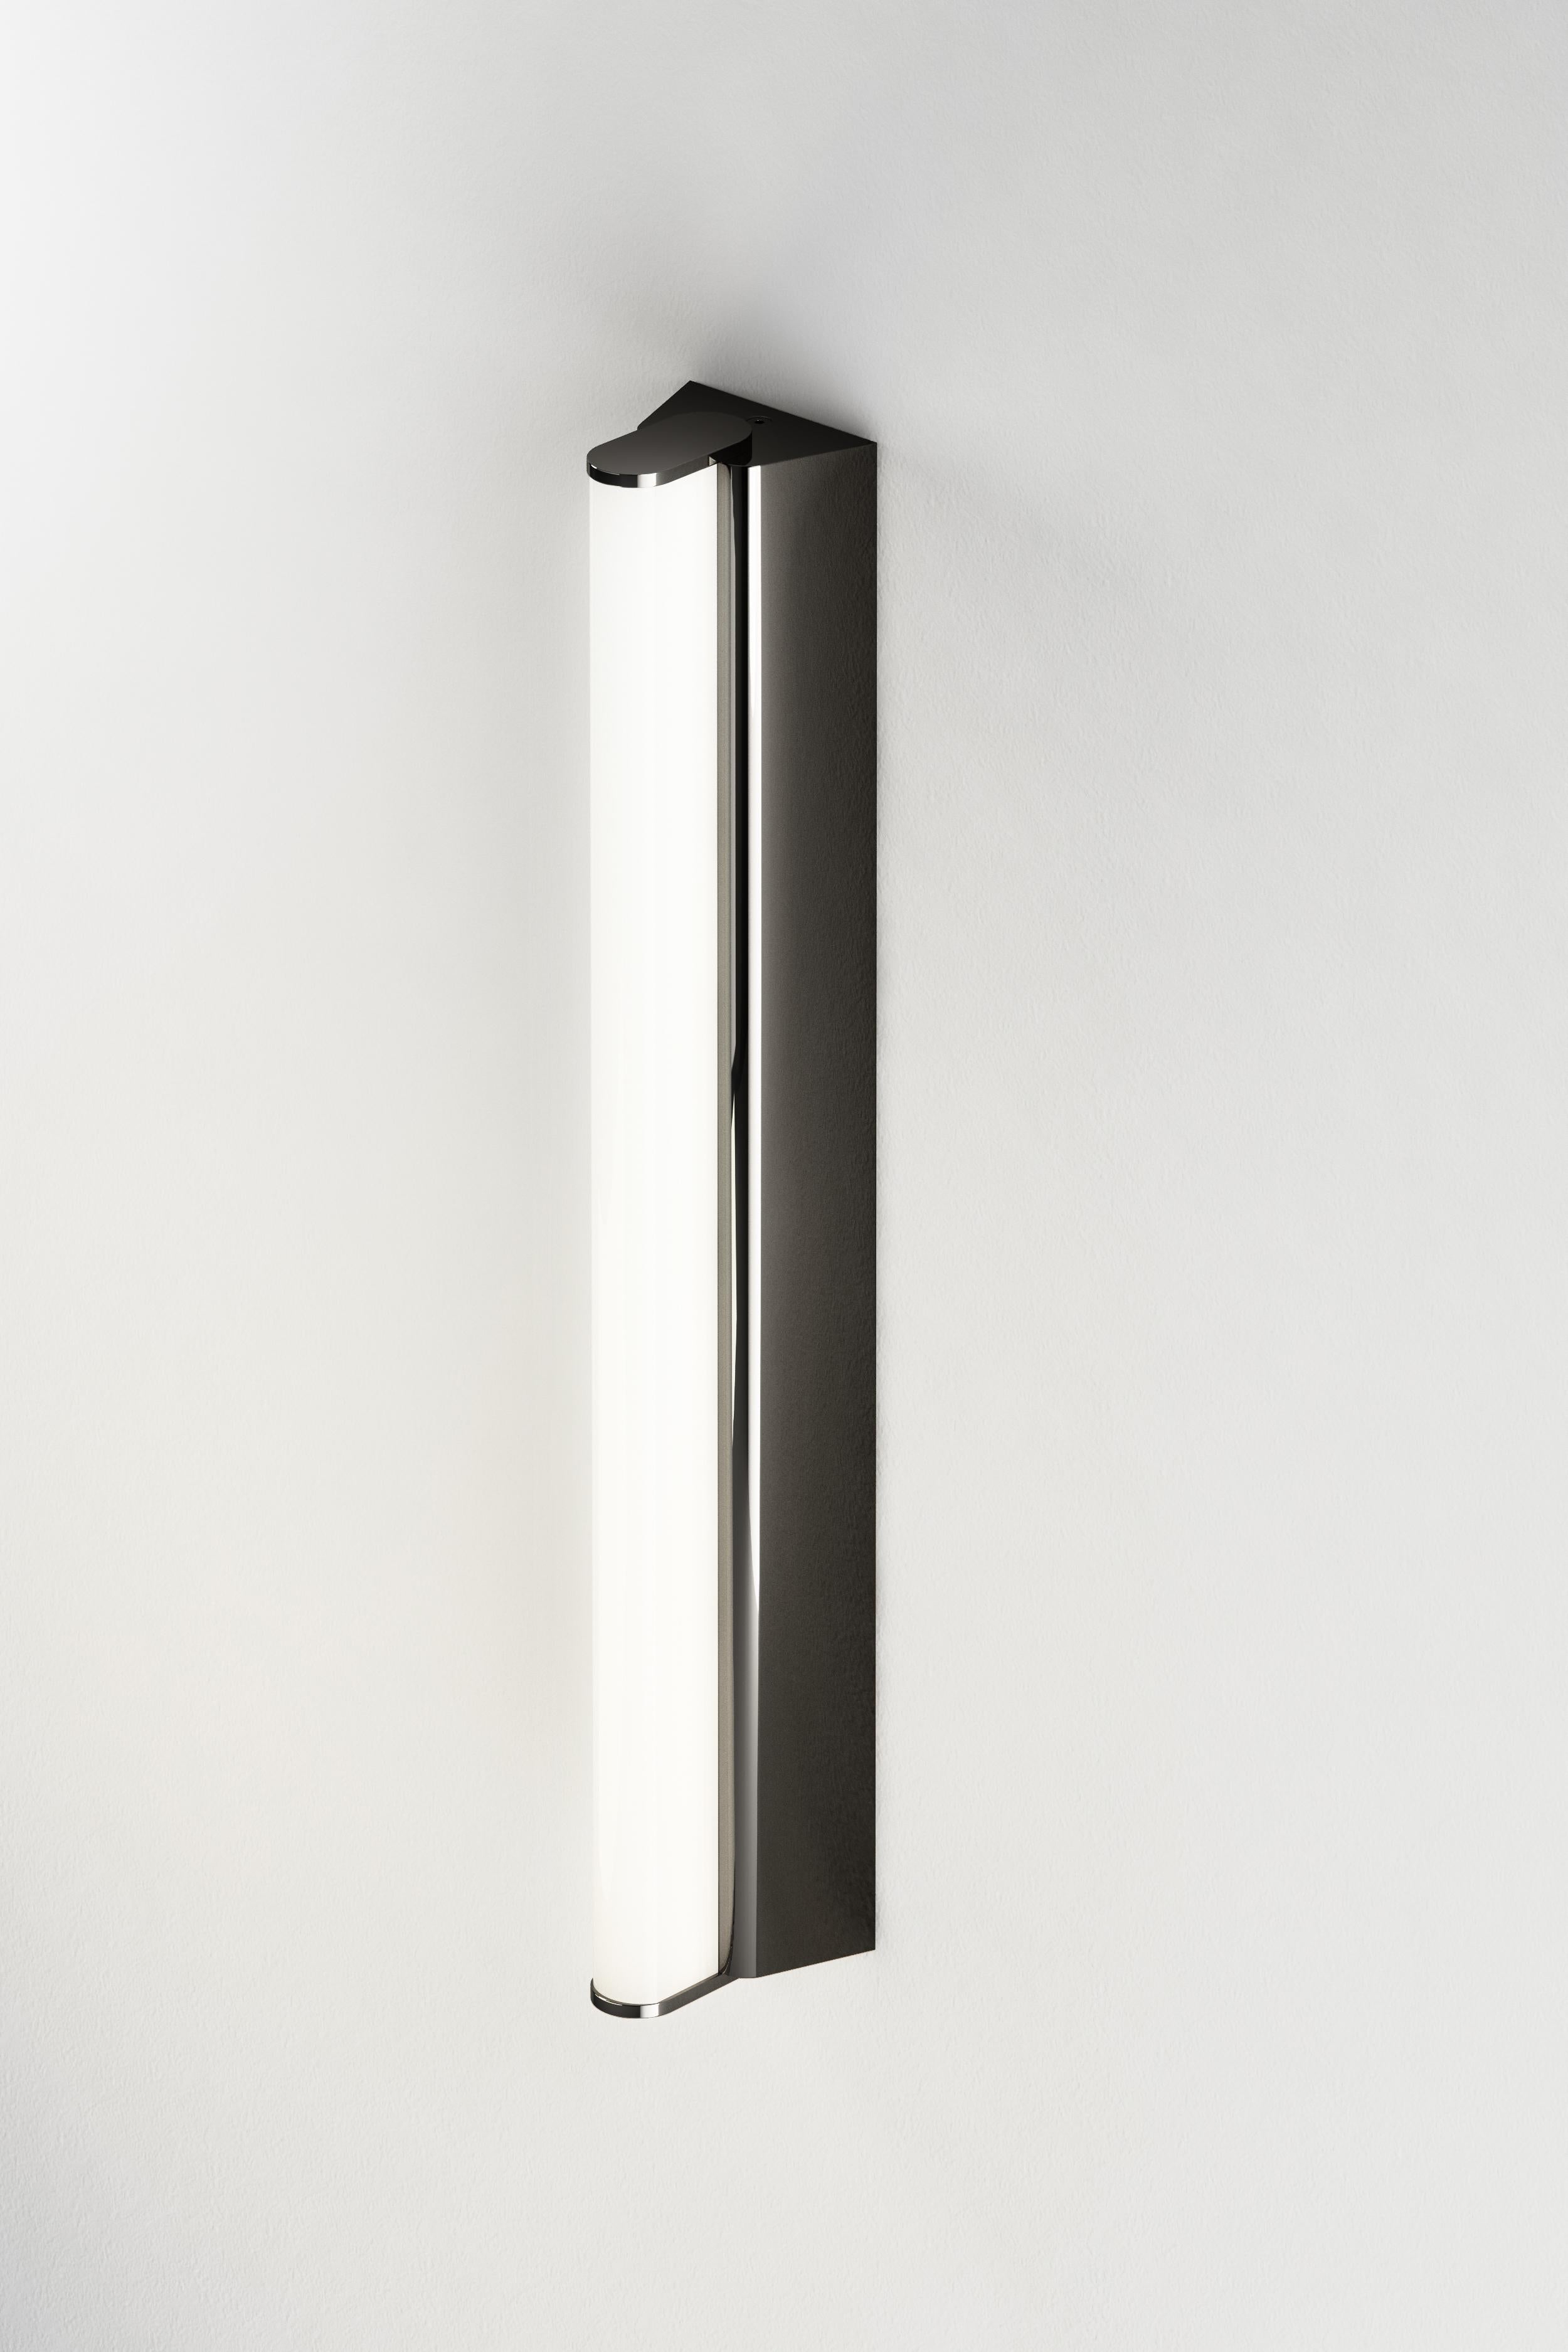 IP metrop 325 polished graphite wall light by Emilie Cathelineau
Dimensions: D32.5 x W5 X H4.5 cm
Materials: solid brass, polished graphite, led, polycarbonate.
Others finishes and dimensions are available. 

All our lamps can be wired